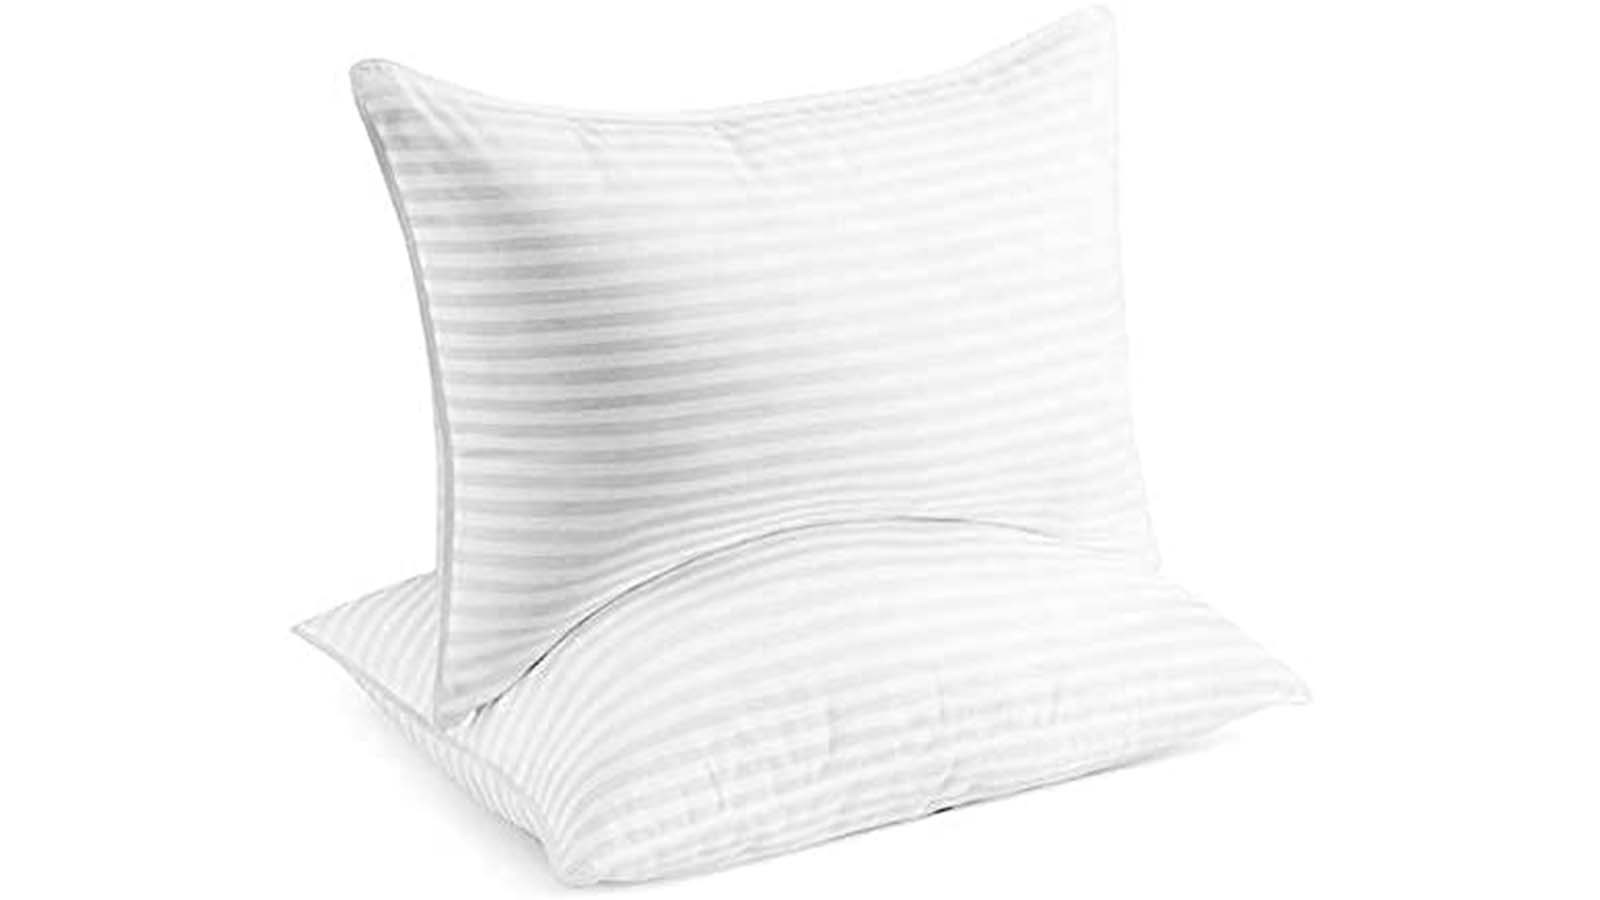 https://media.cnn.com/api/v1/images/stellar/prod/underscored-vacationhome-beckham-hotel-collection-bed-pillows-for-sleeping-queen-size-set-of-2.jpg?q=h_900,w_1600,x_0,y_0